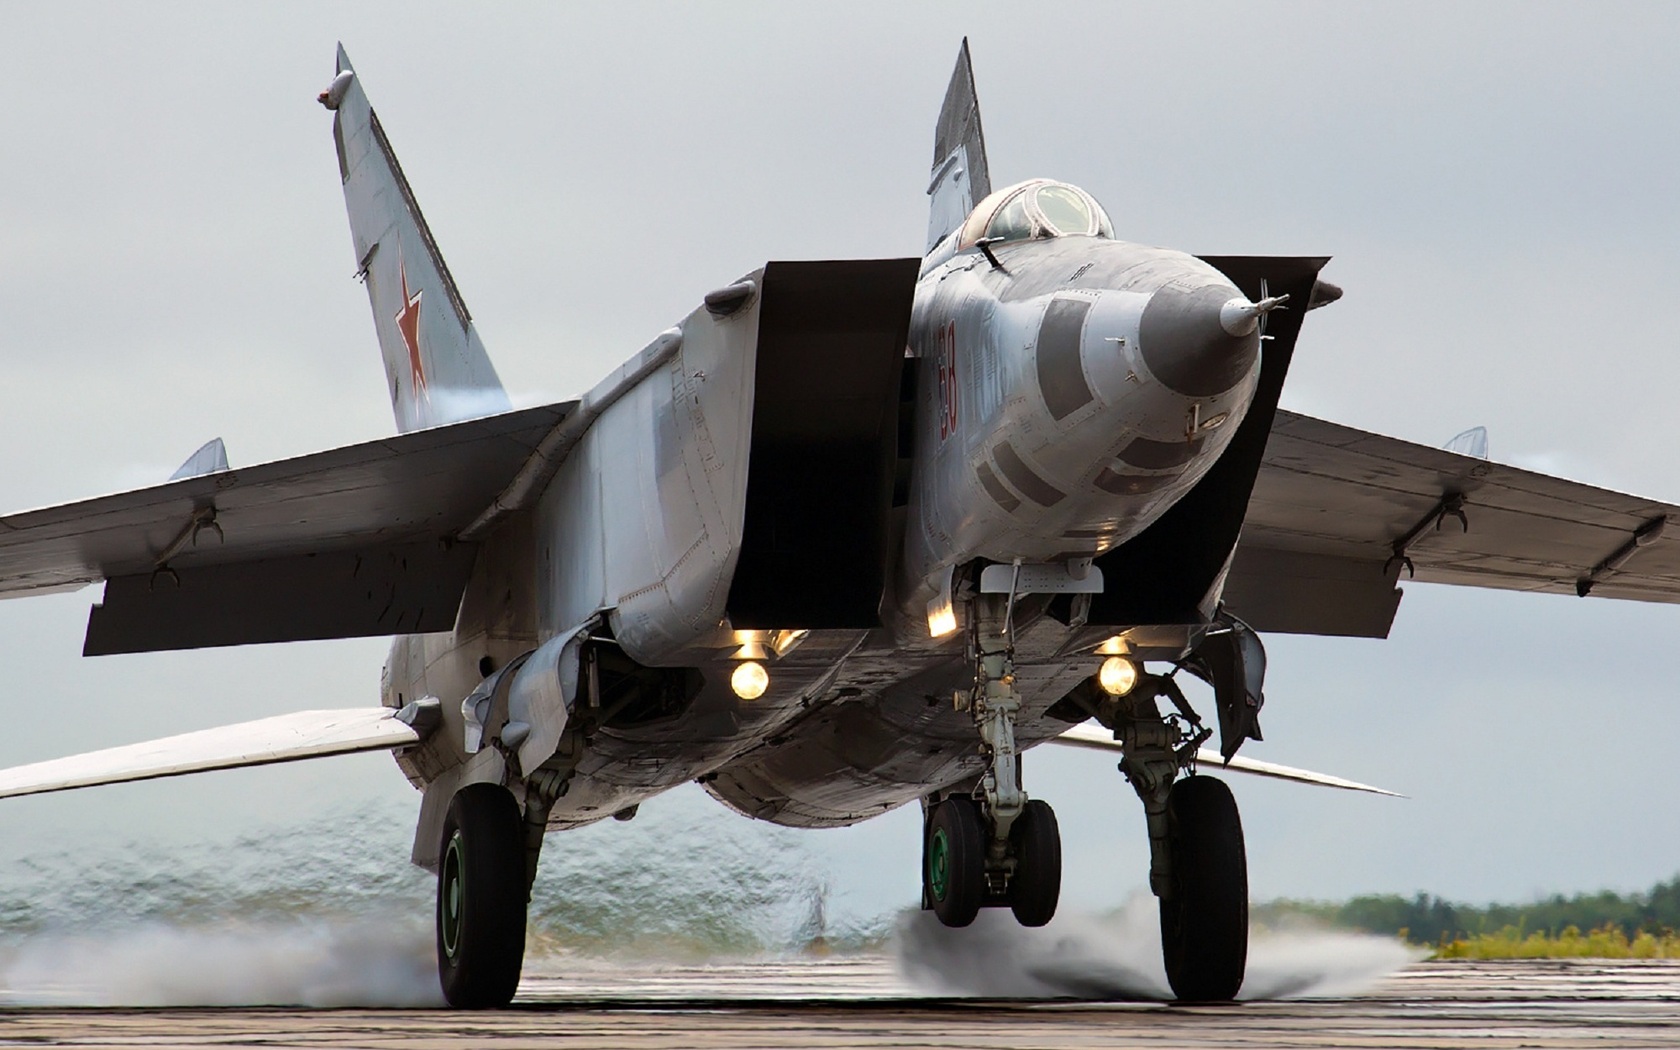 The MiG-25 "Foxbat", one of the fastest military aircraft of its time. 